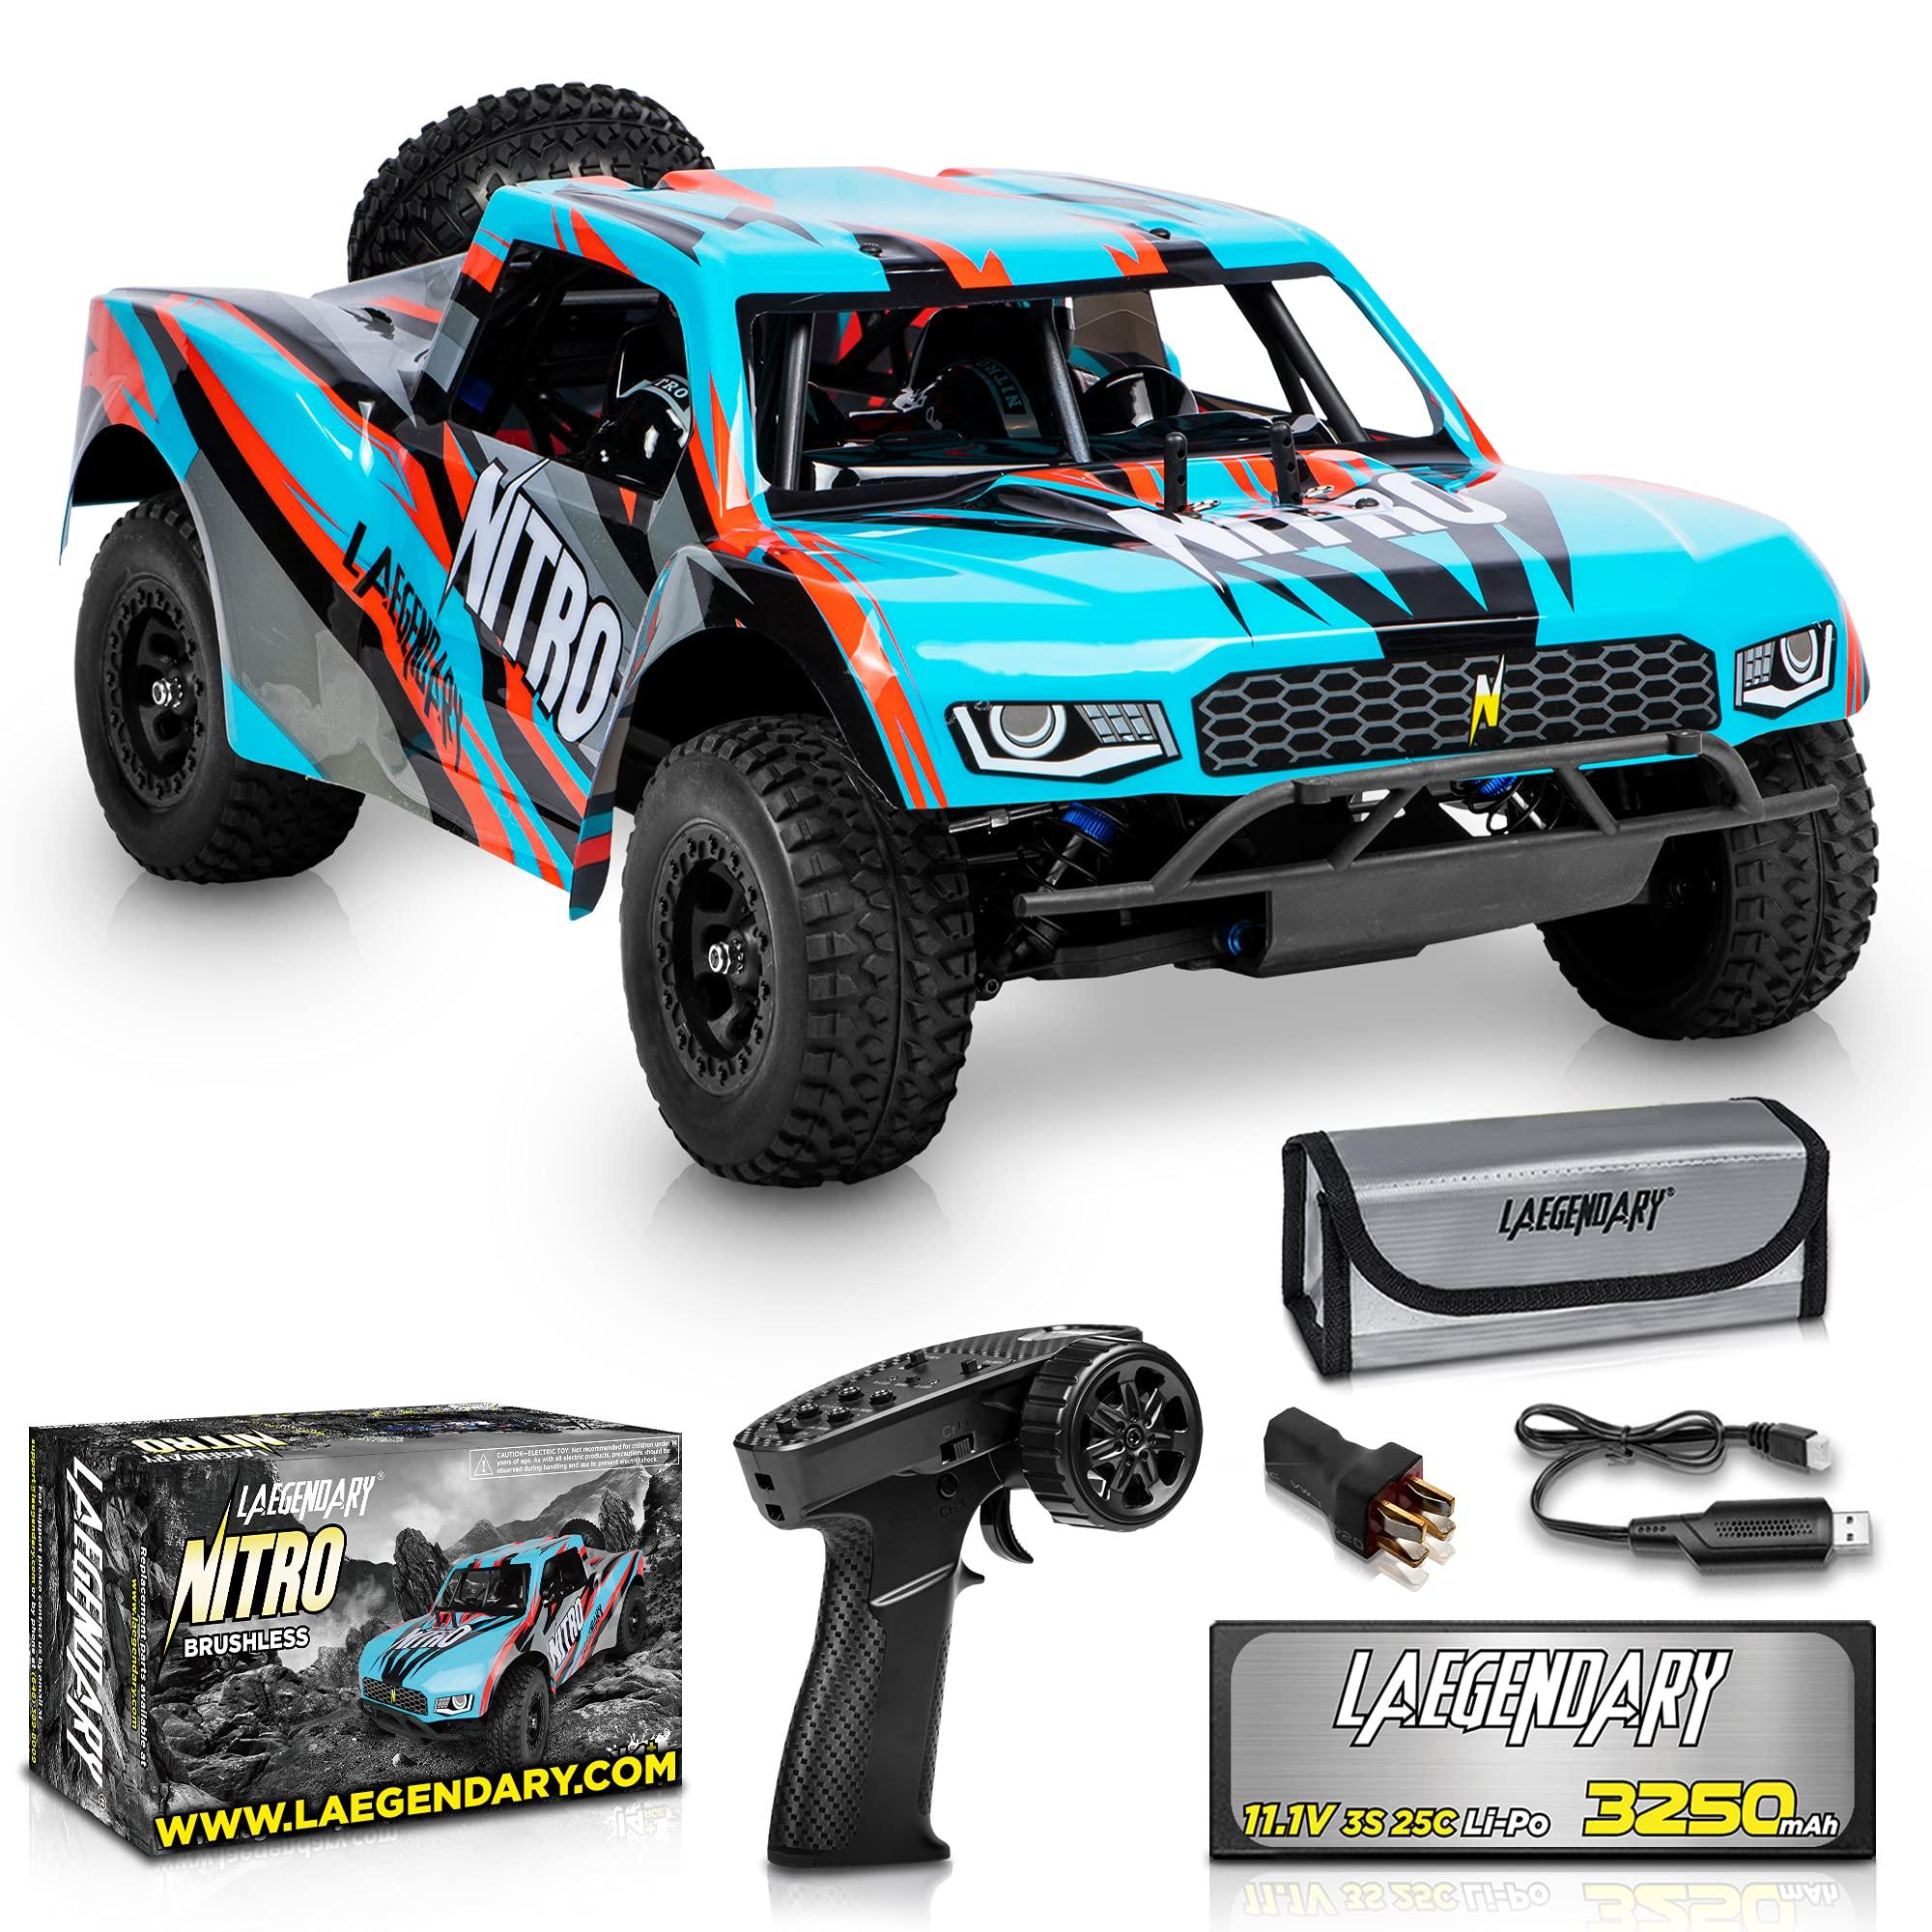 Nitro 4X4 Rc Truck: Top Features of the Nitro 4x4 RC Truck